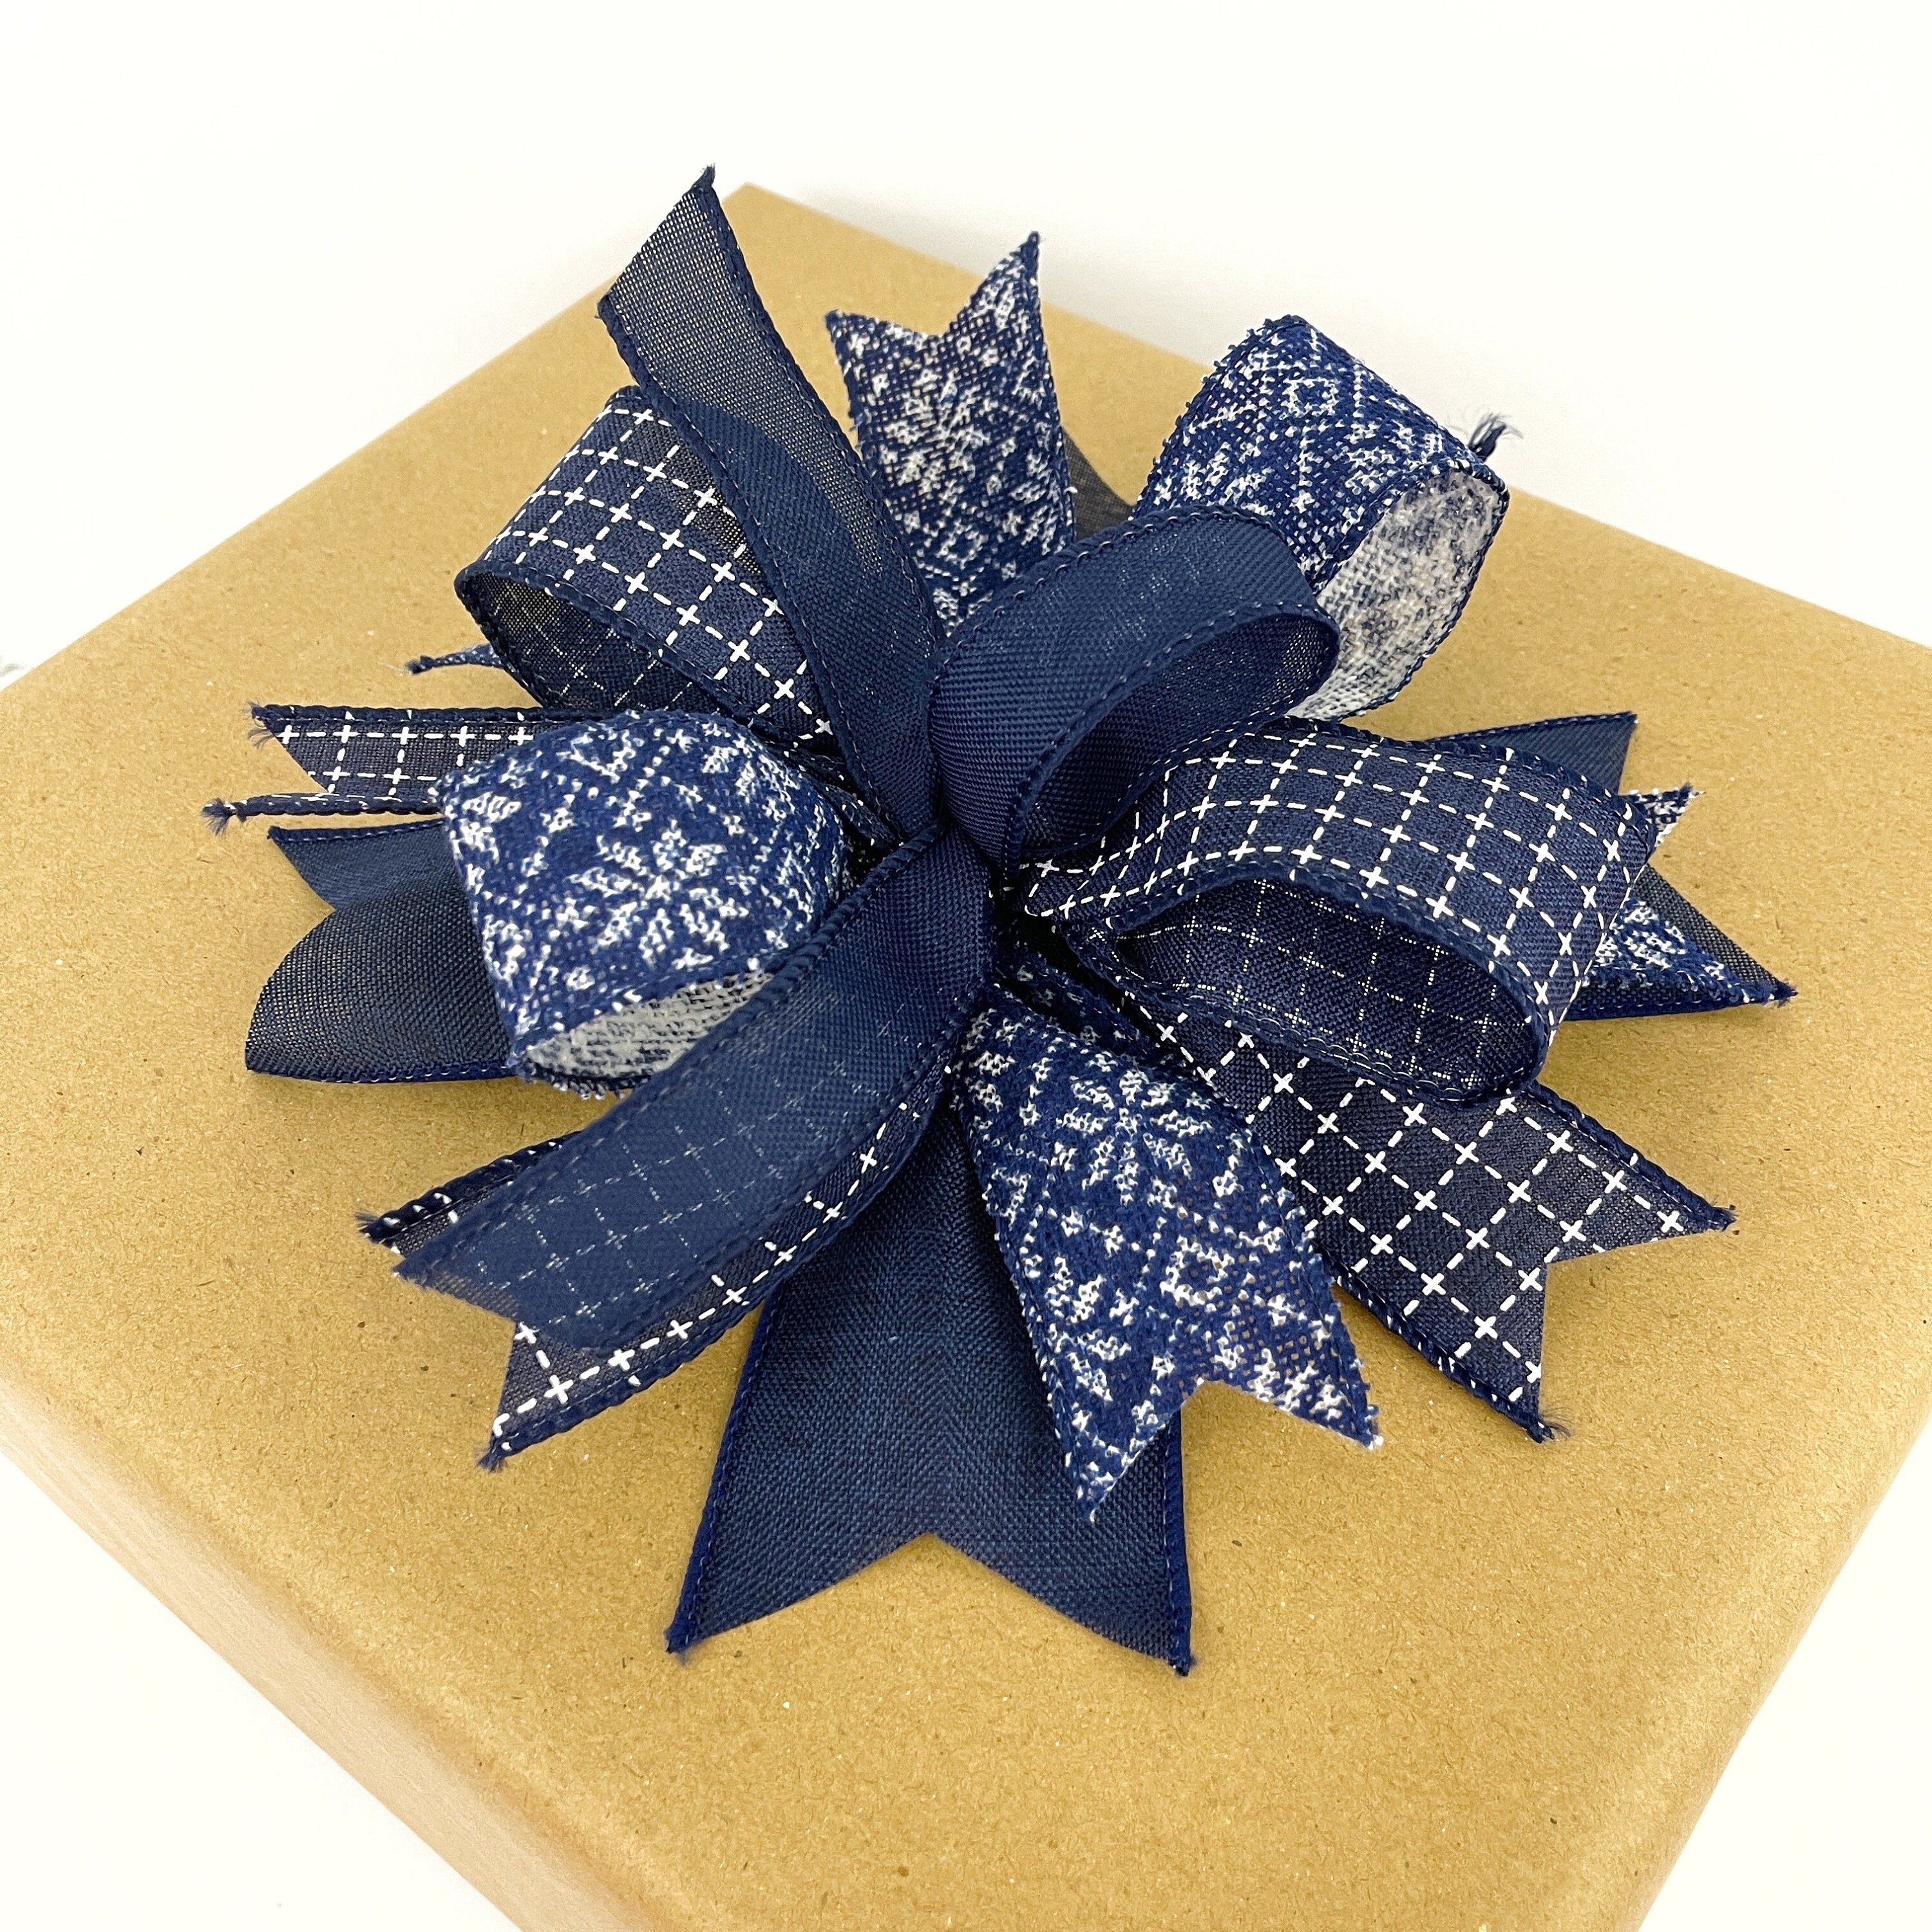 Pre-Tied Navy Blue Satin Bows - 4 1/2 Wide, Set of 12, Wired Craft Ribbon,  Christmas, Veteran's Day, 4th of July, Gift Bows, Gift Basket, Birthday